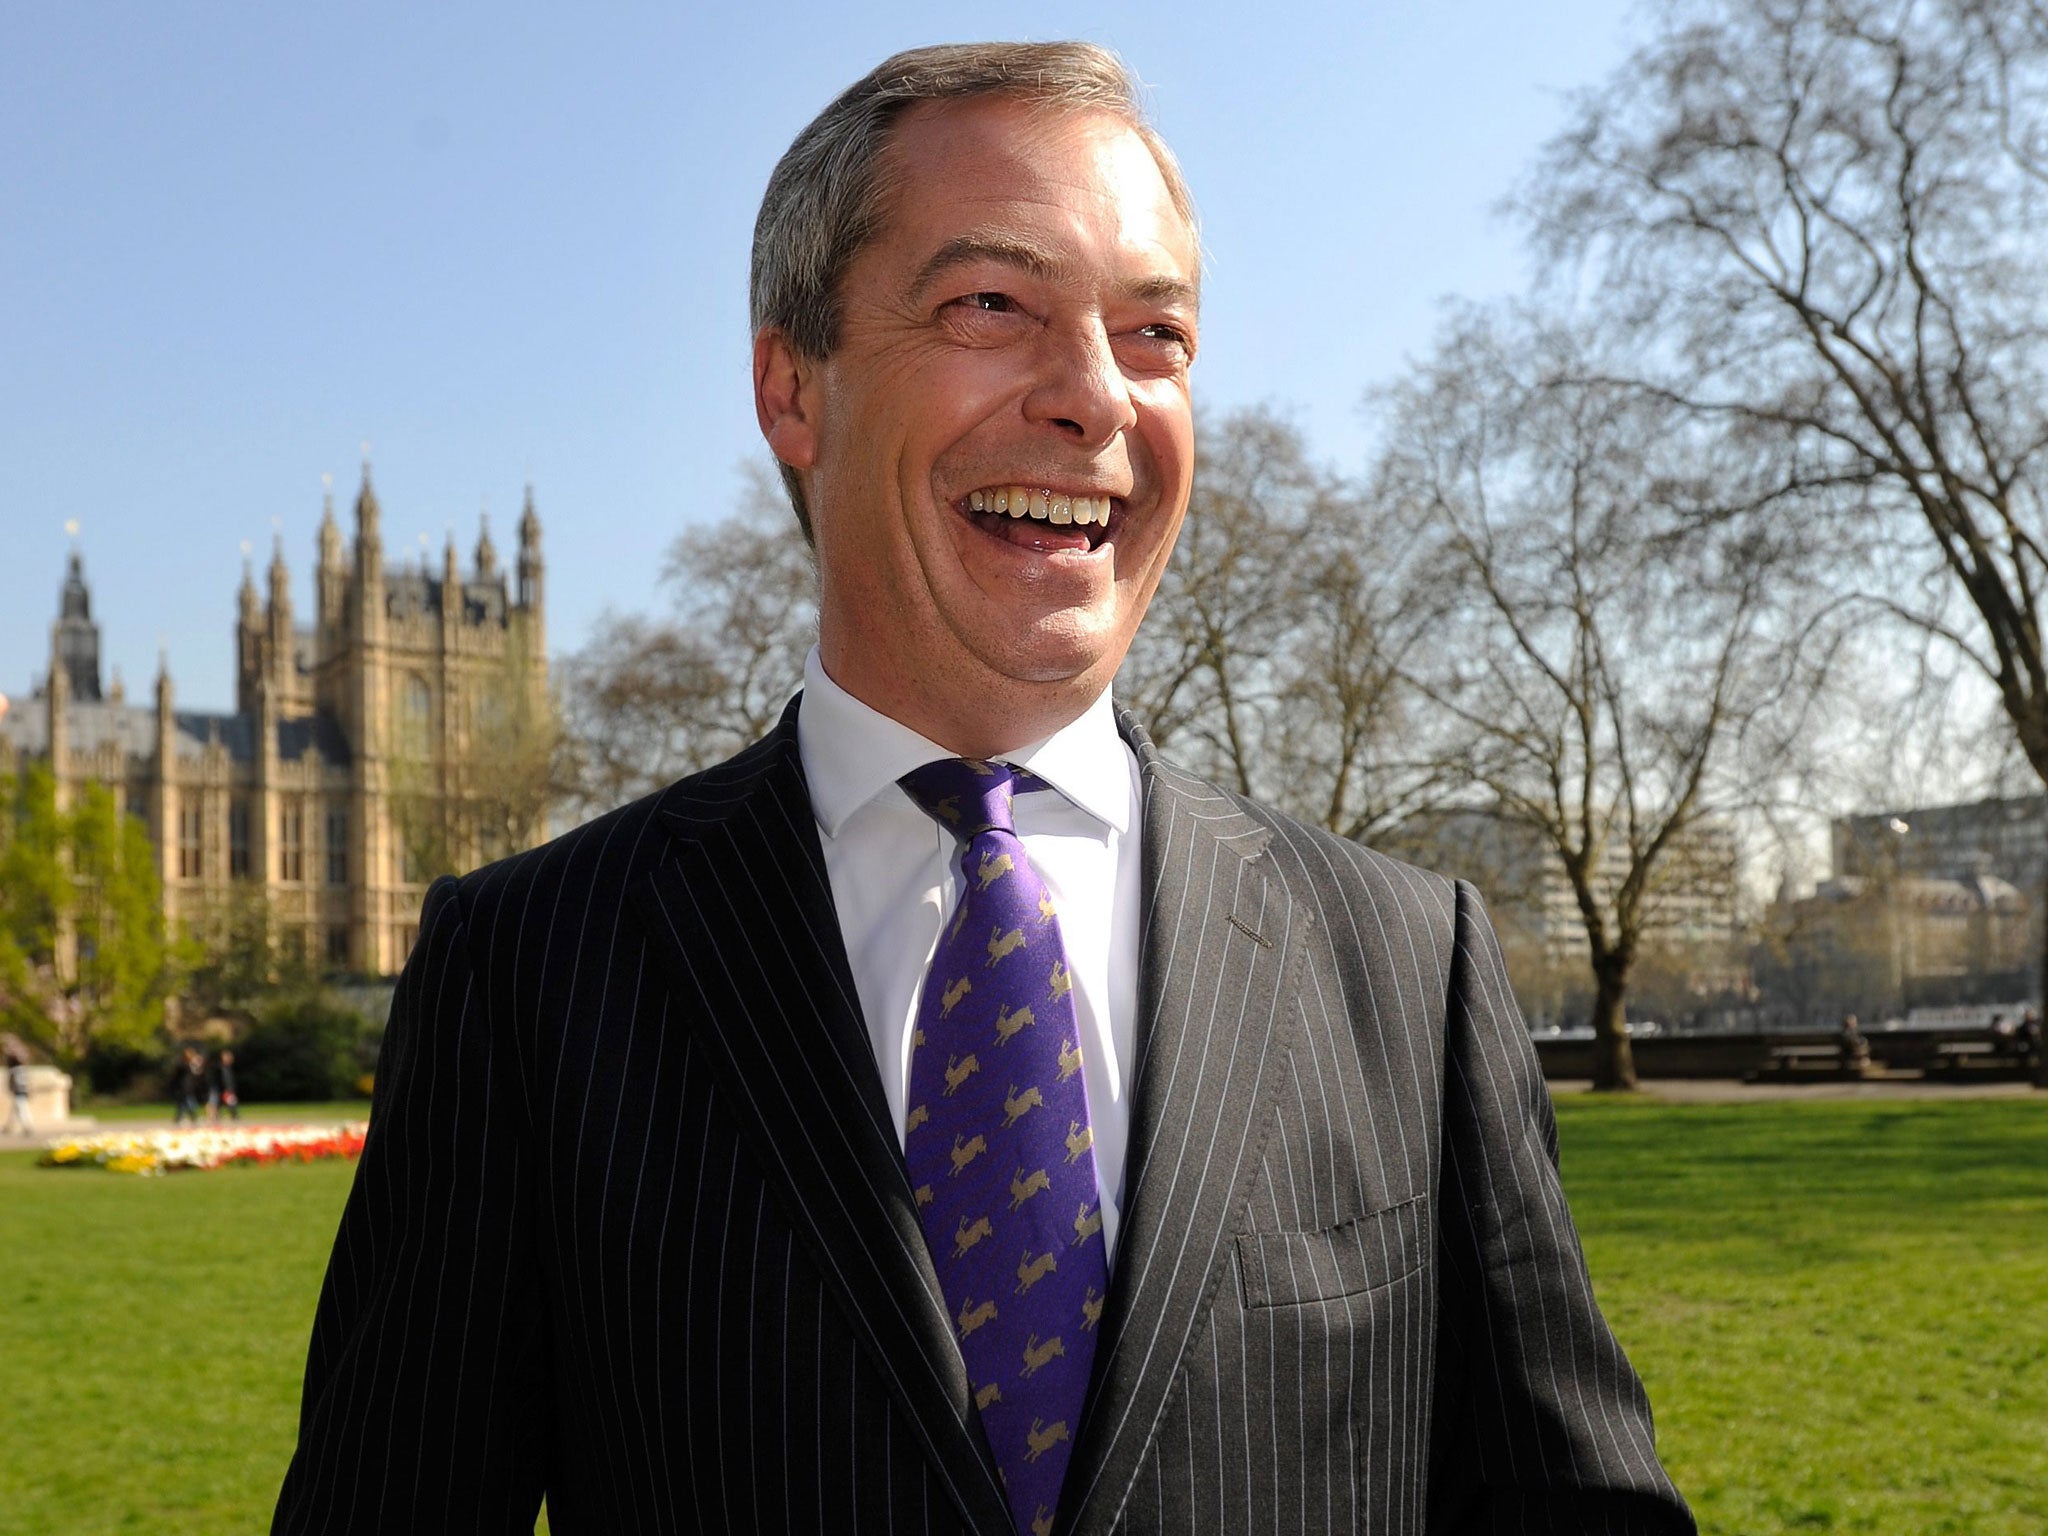 Former Ukip chief executive Will Gilpin says Nigel Farage should have less power within the party